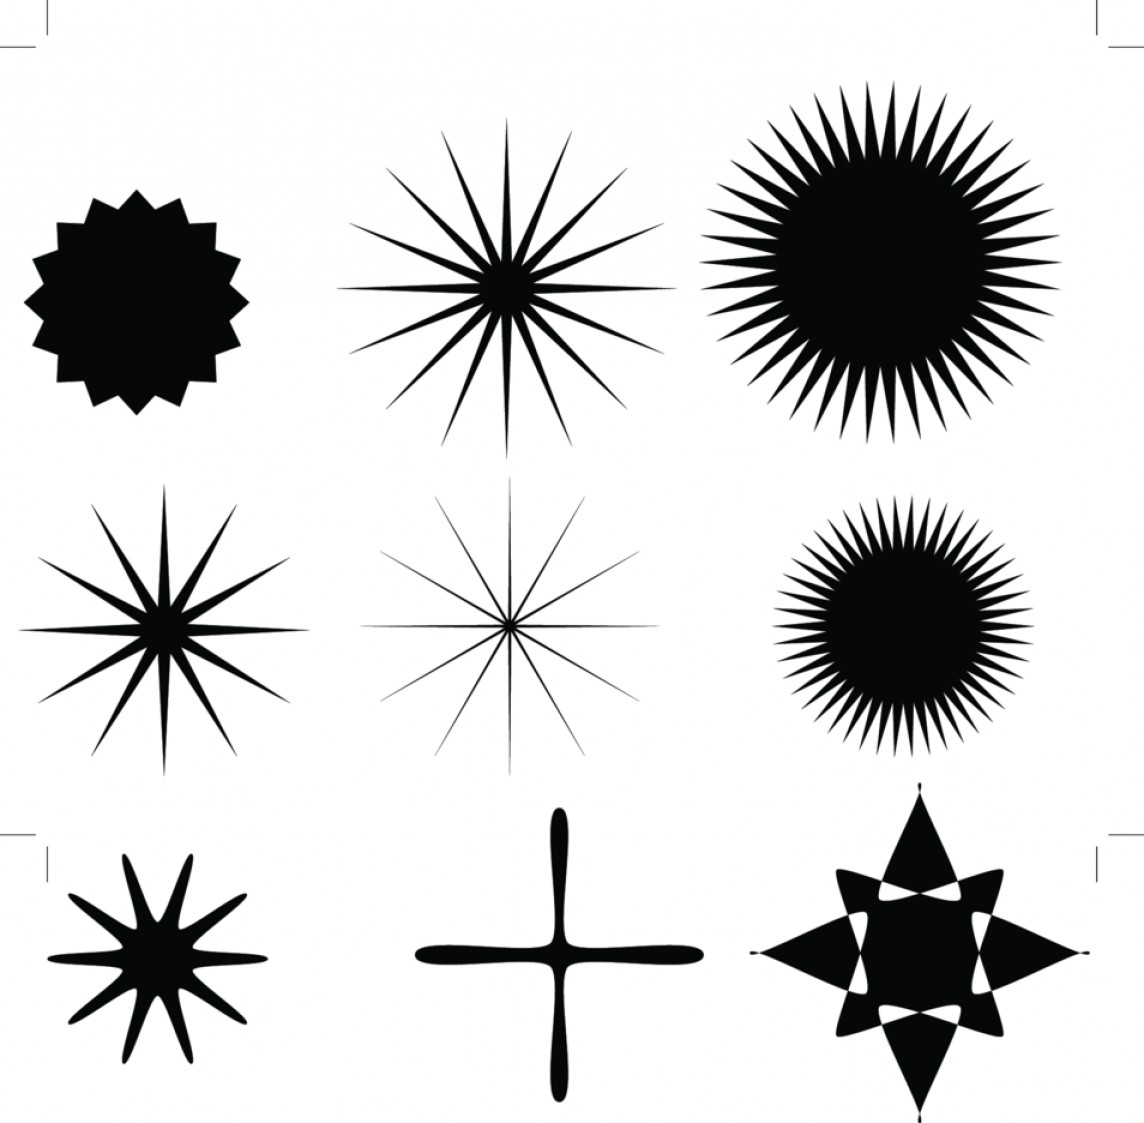 Download Free Vector Shapes For Photoshop at Vectorified.com ...